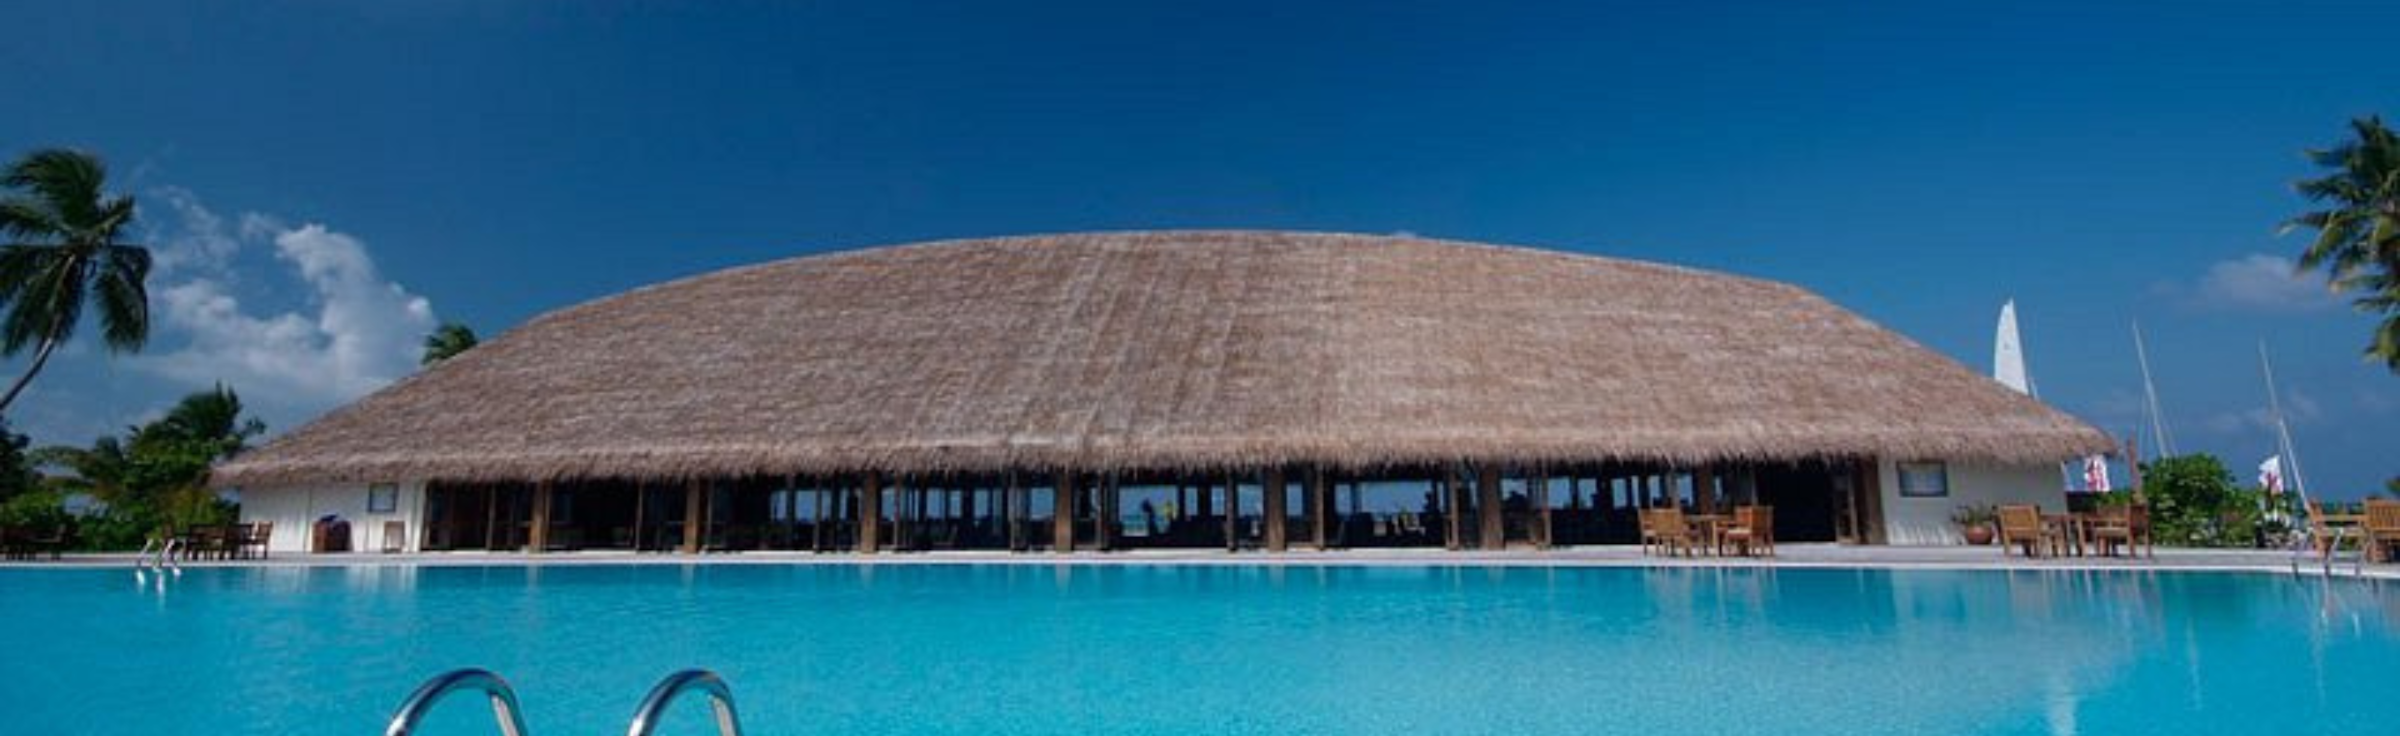 Canareef Resort Maldives Packages